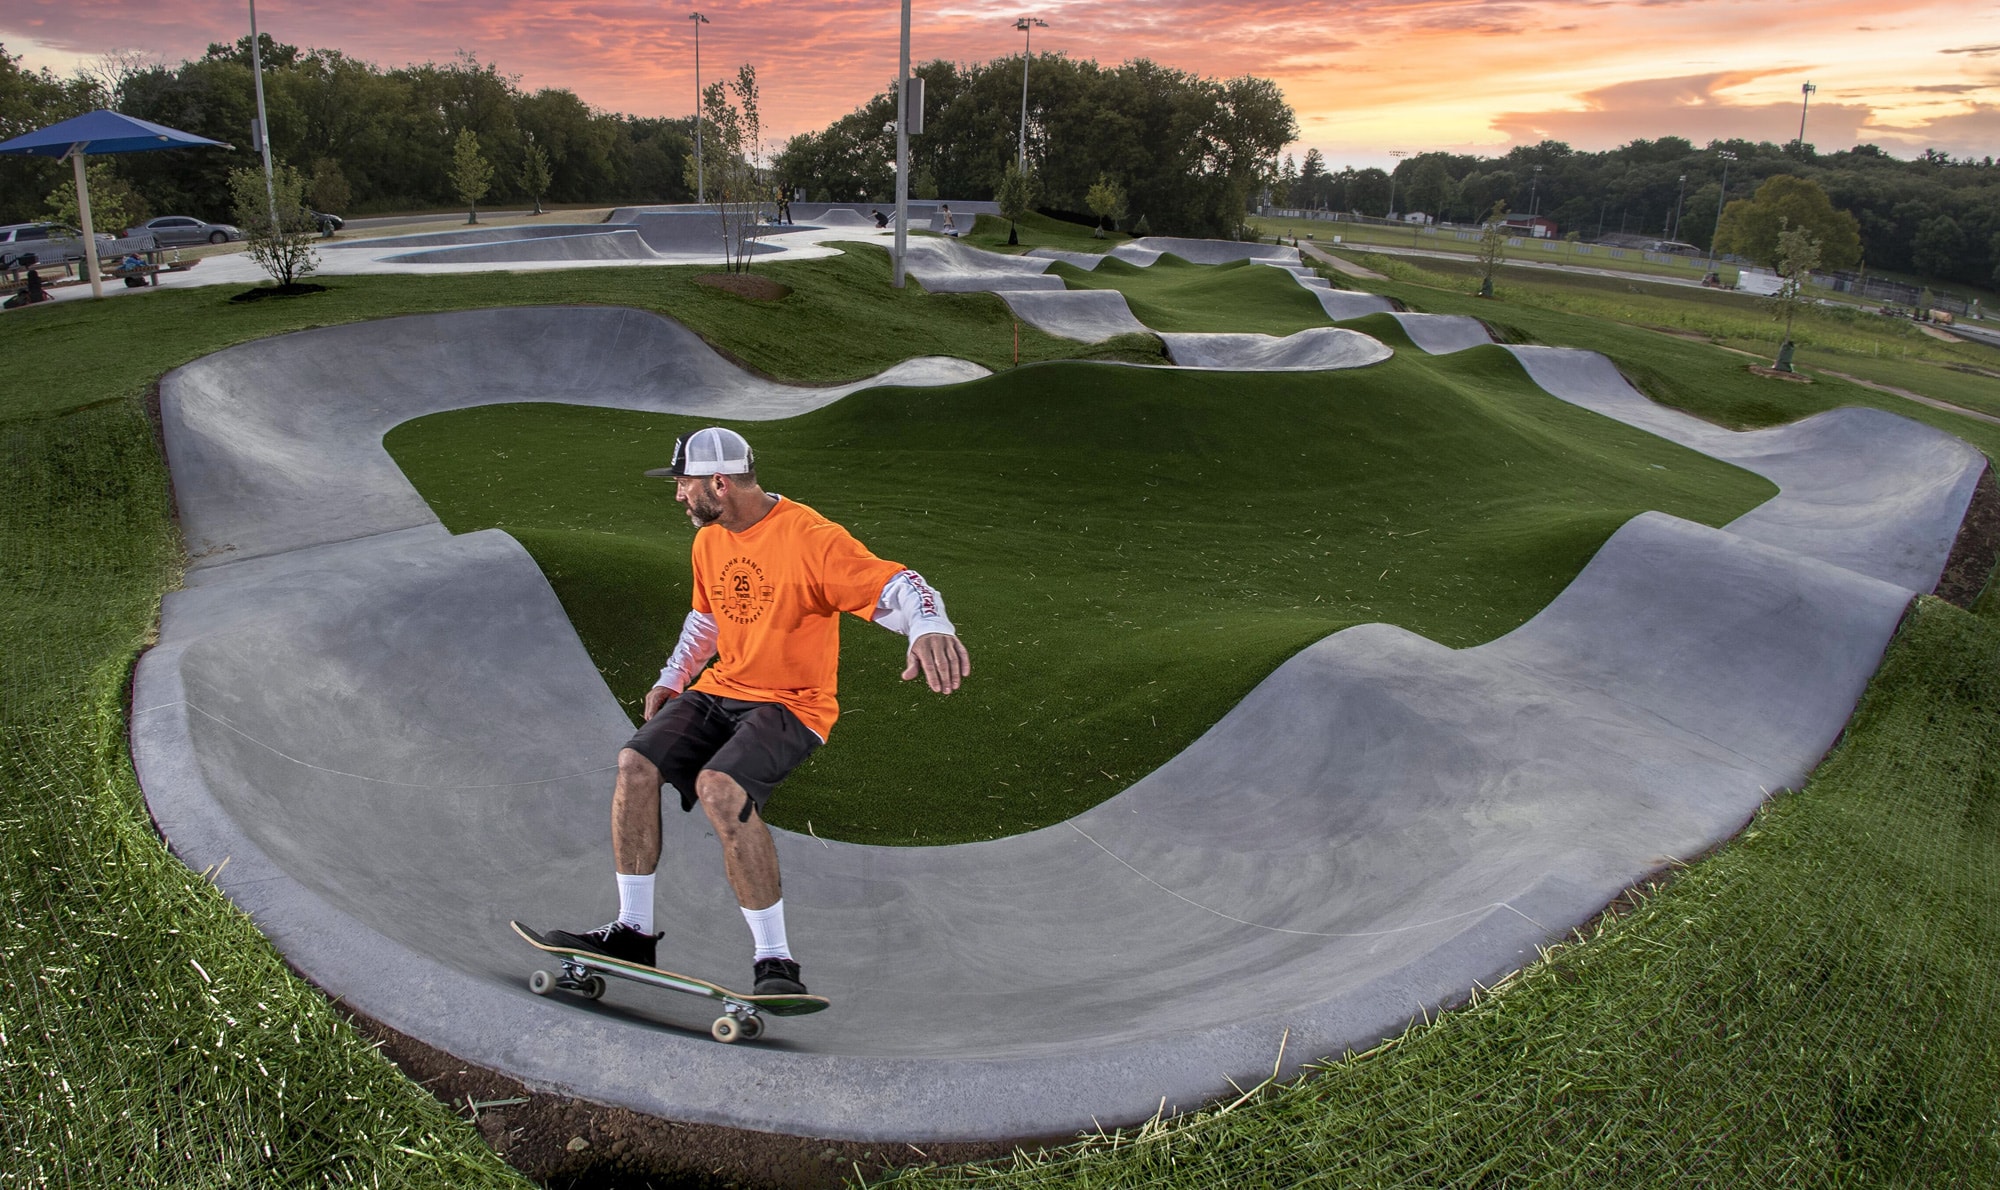 Sunset carve at Spohn Ranch's new pump track located in Cottage Grove, WI